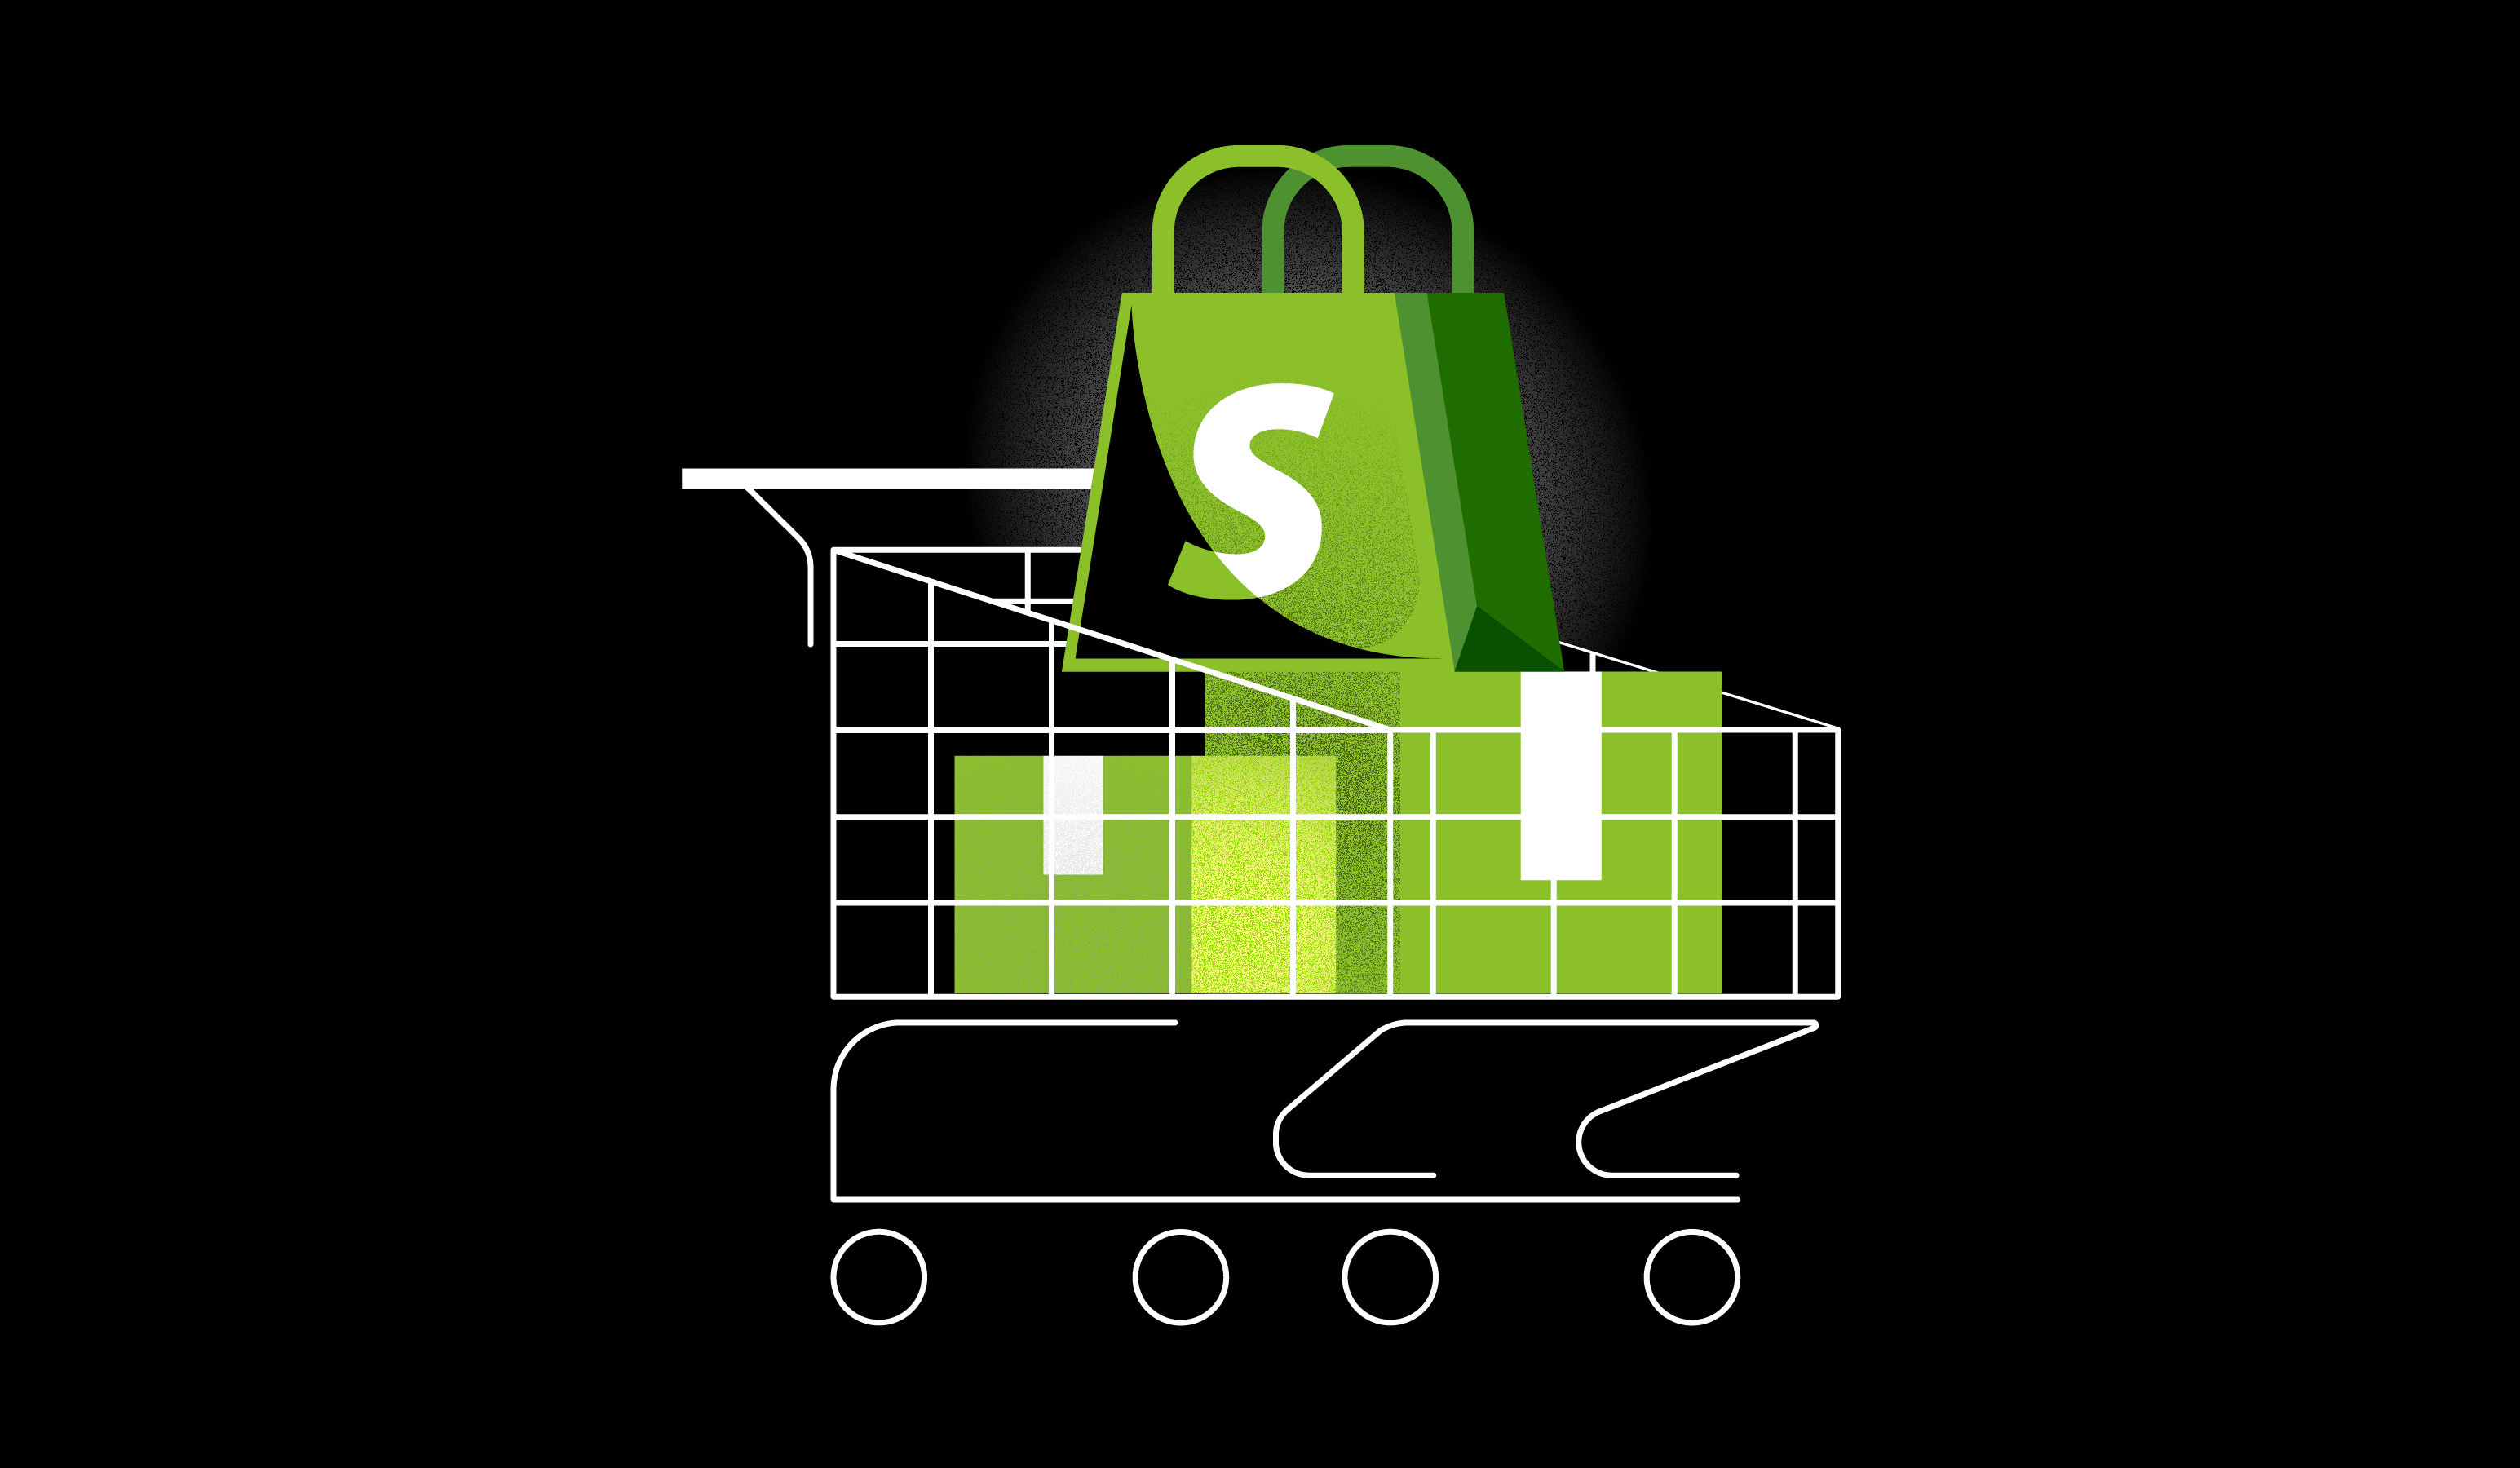 Shopify Stores That Launched on August 18, 2021